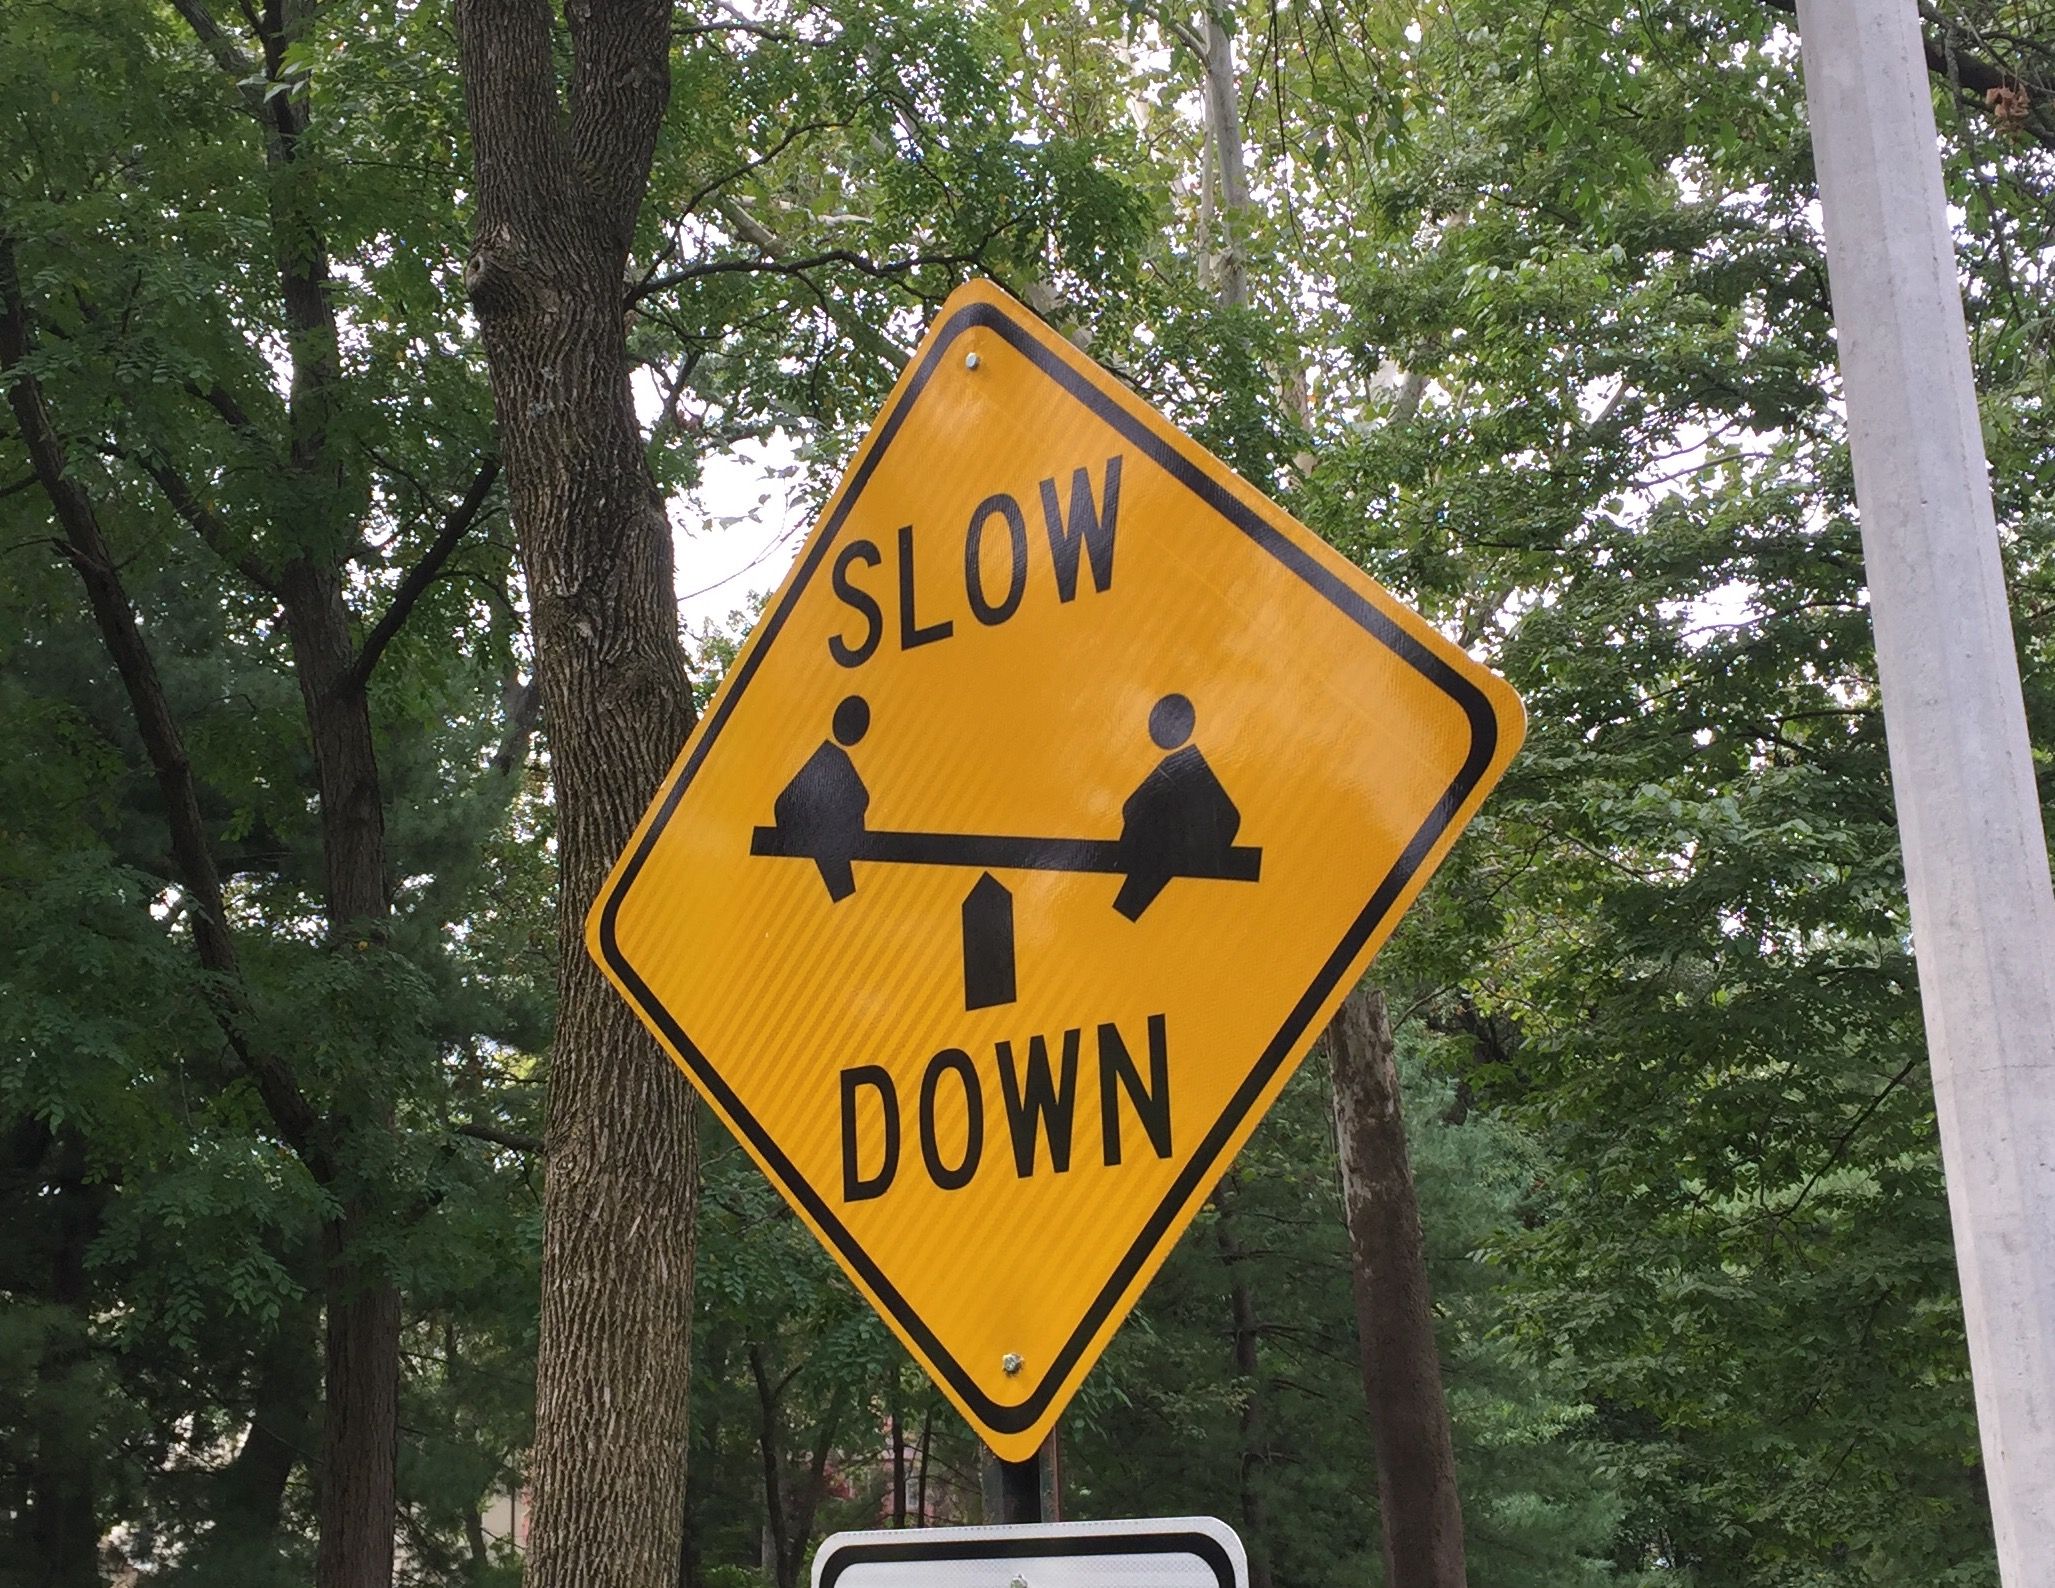 Slow down-- you're going to want to see these fat kids seesaw.